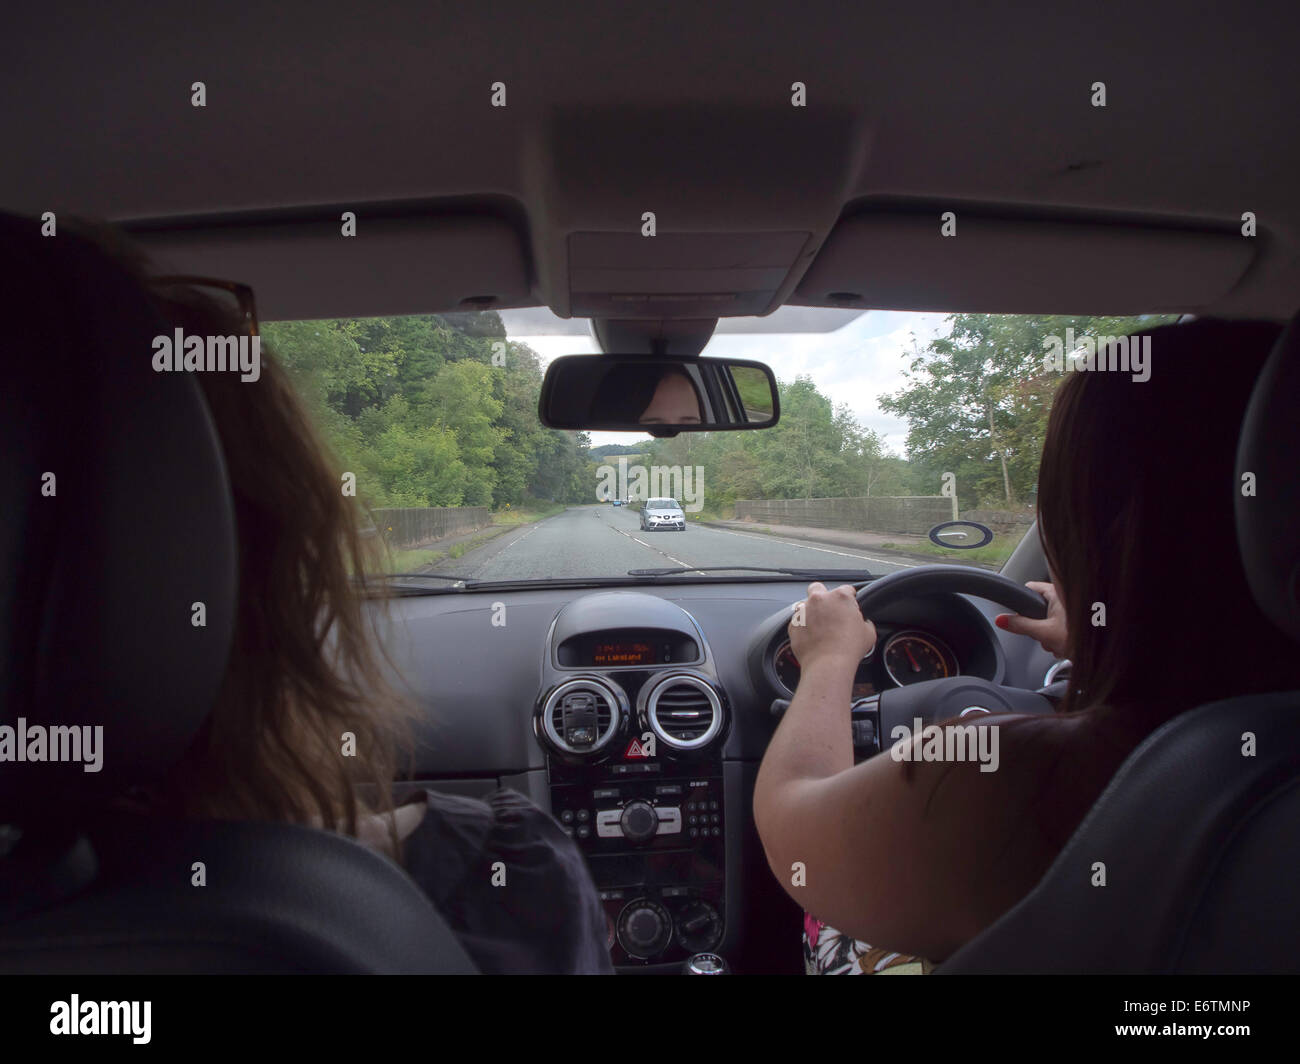 https://c8.alamy.com/comp/E6TMNP/a-view-from-the-back-seat-of-a-car-showing-a-driver-and-passenger-E6TMNP.jpg